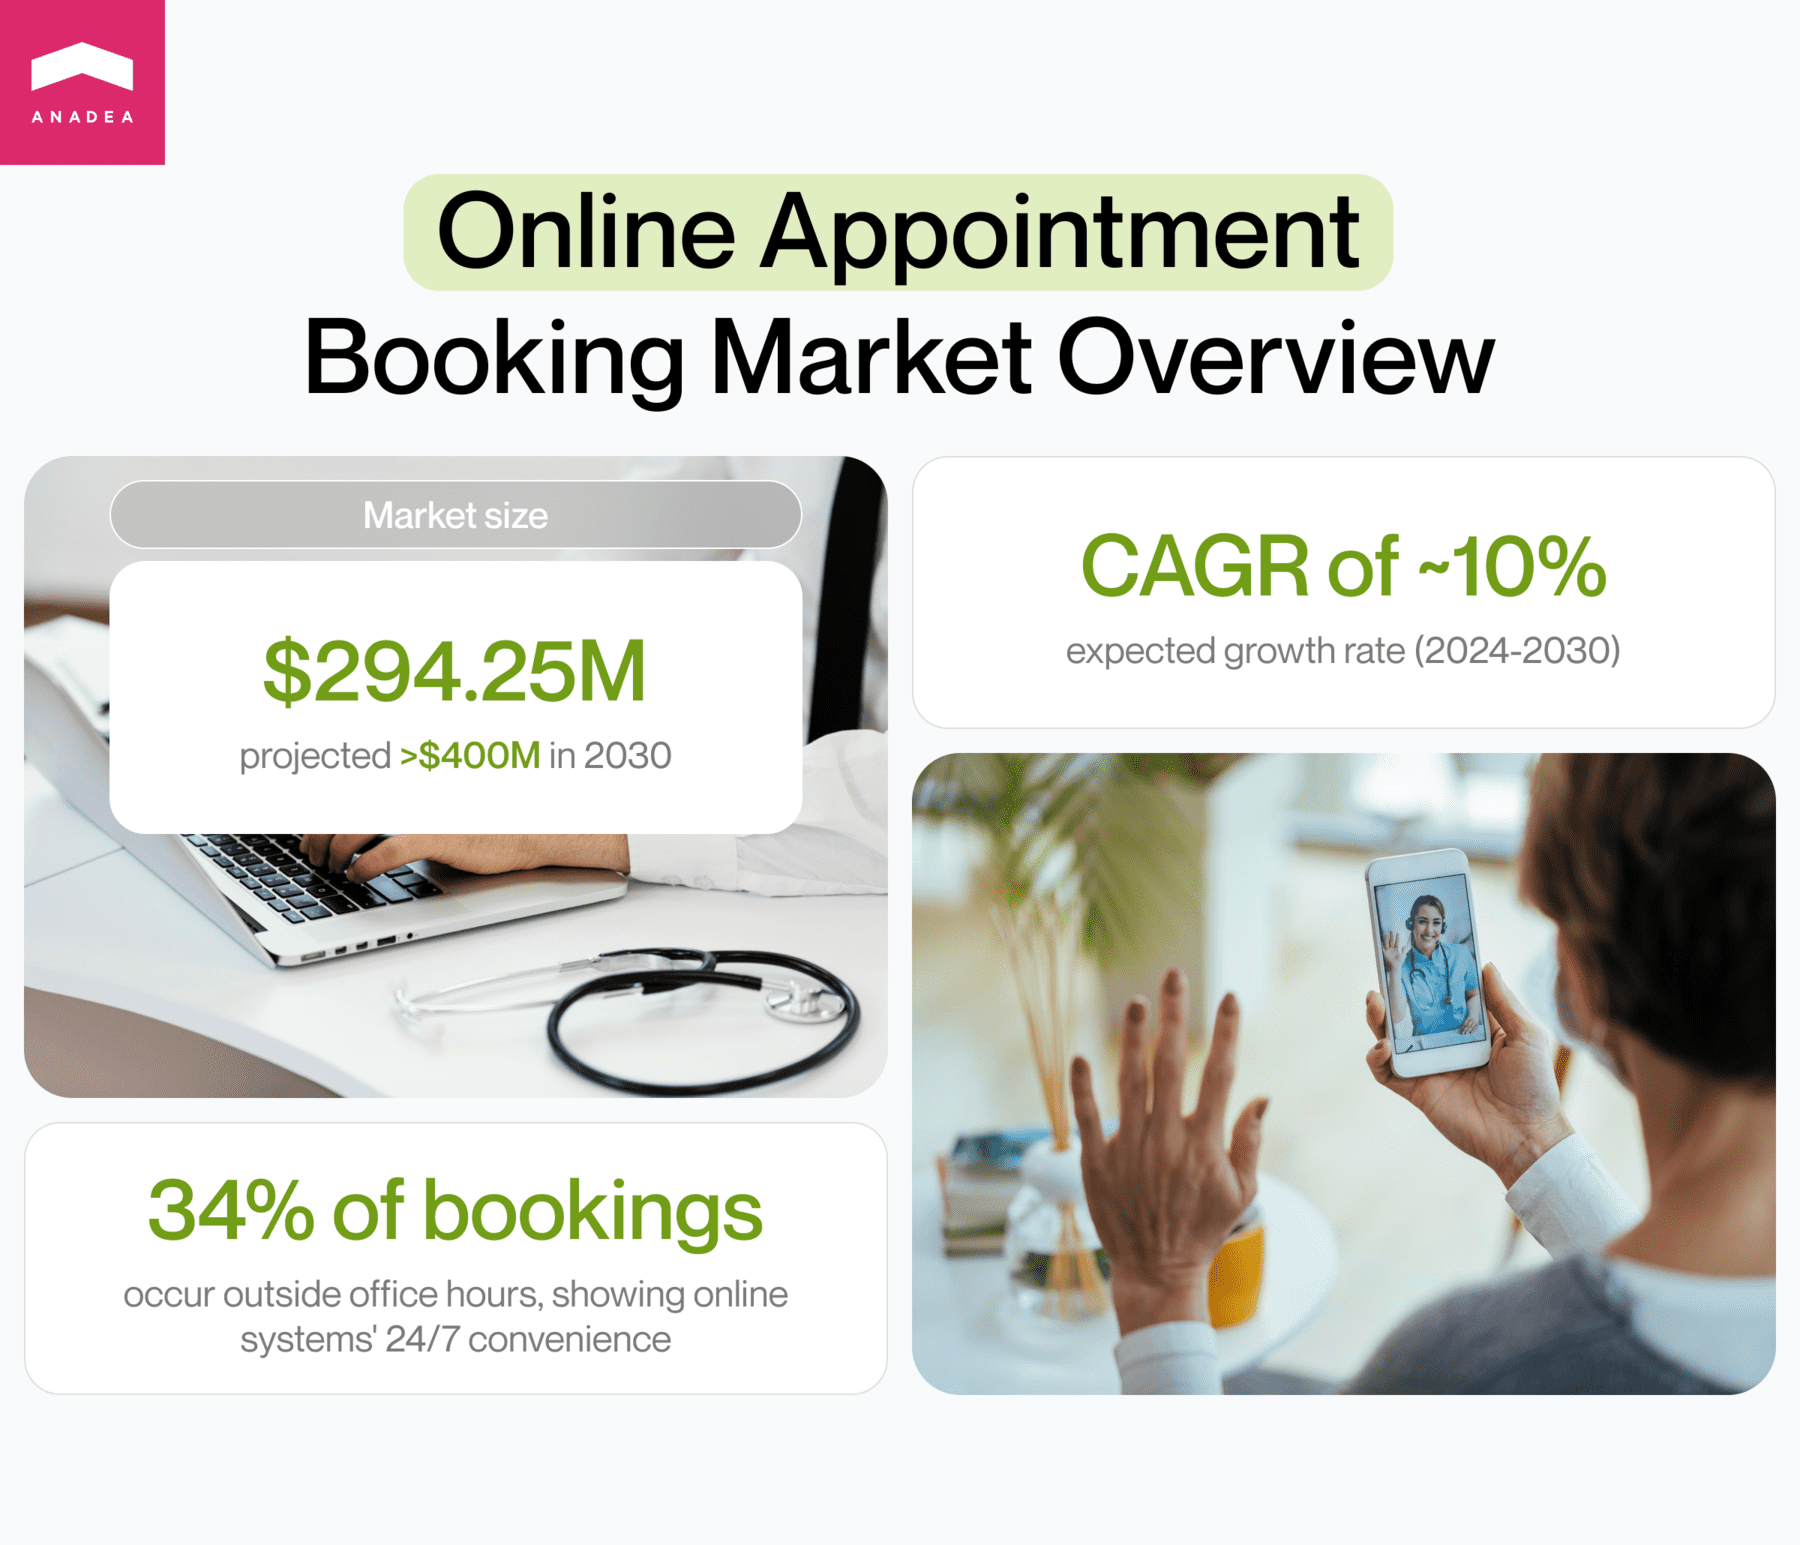 Market overview of online appointment booking